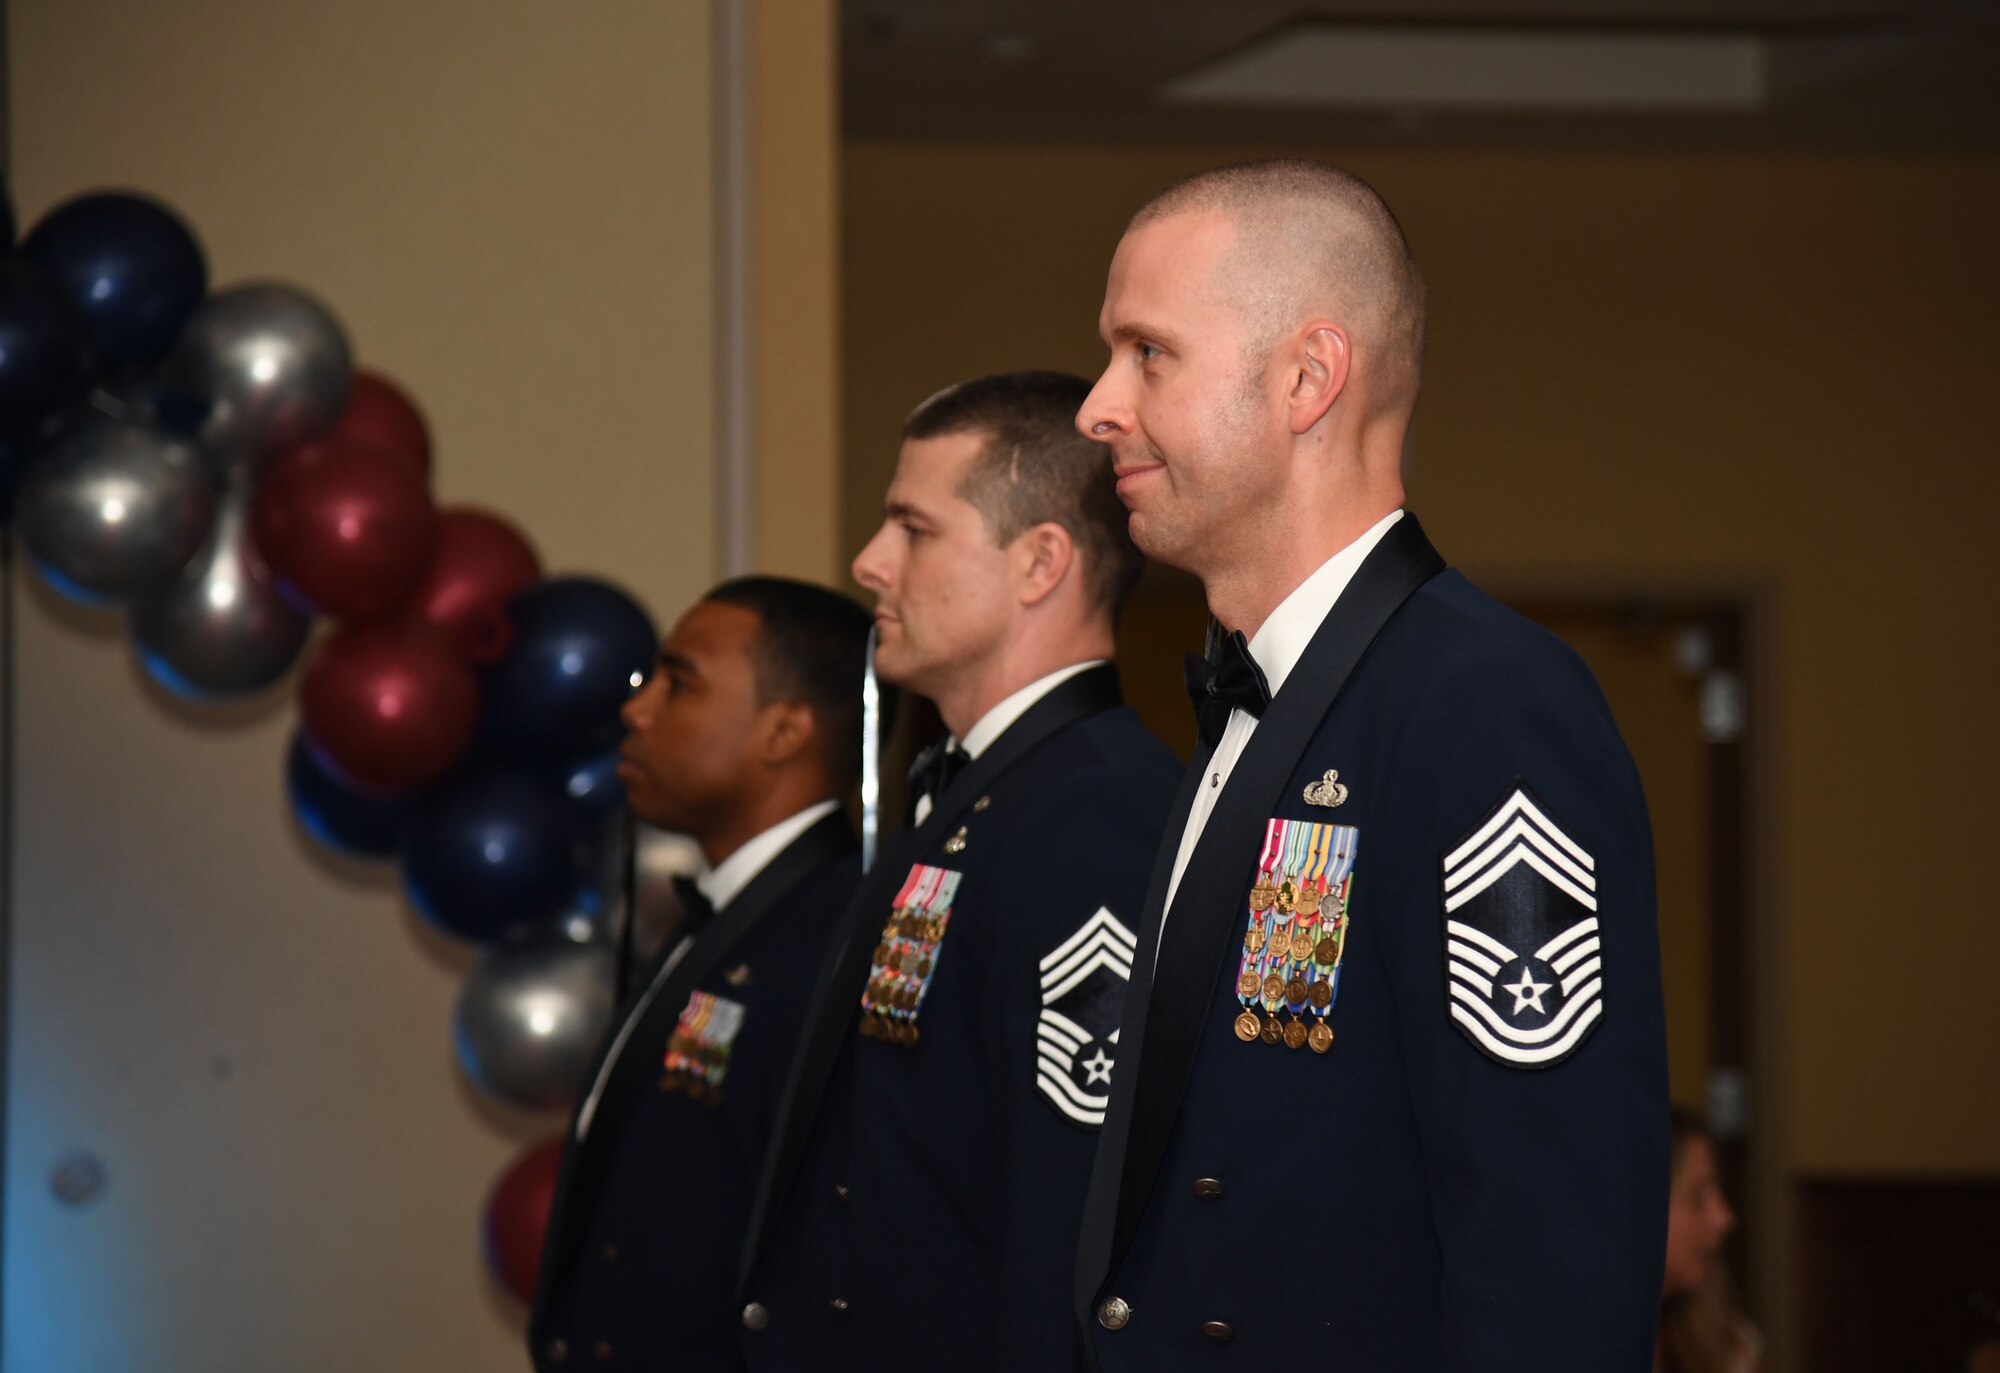 U.S. Air Force Chief Master Sgt. Lance Power, 81st Mission Support Group superintendent, leads the saber team during the Chief Master Sergeant Recognition Ceremony inside the Bay Breeze Event Center at Keesler Air Force Base, Mississippi, April 20, 2023.